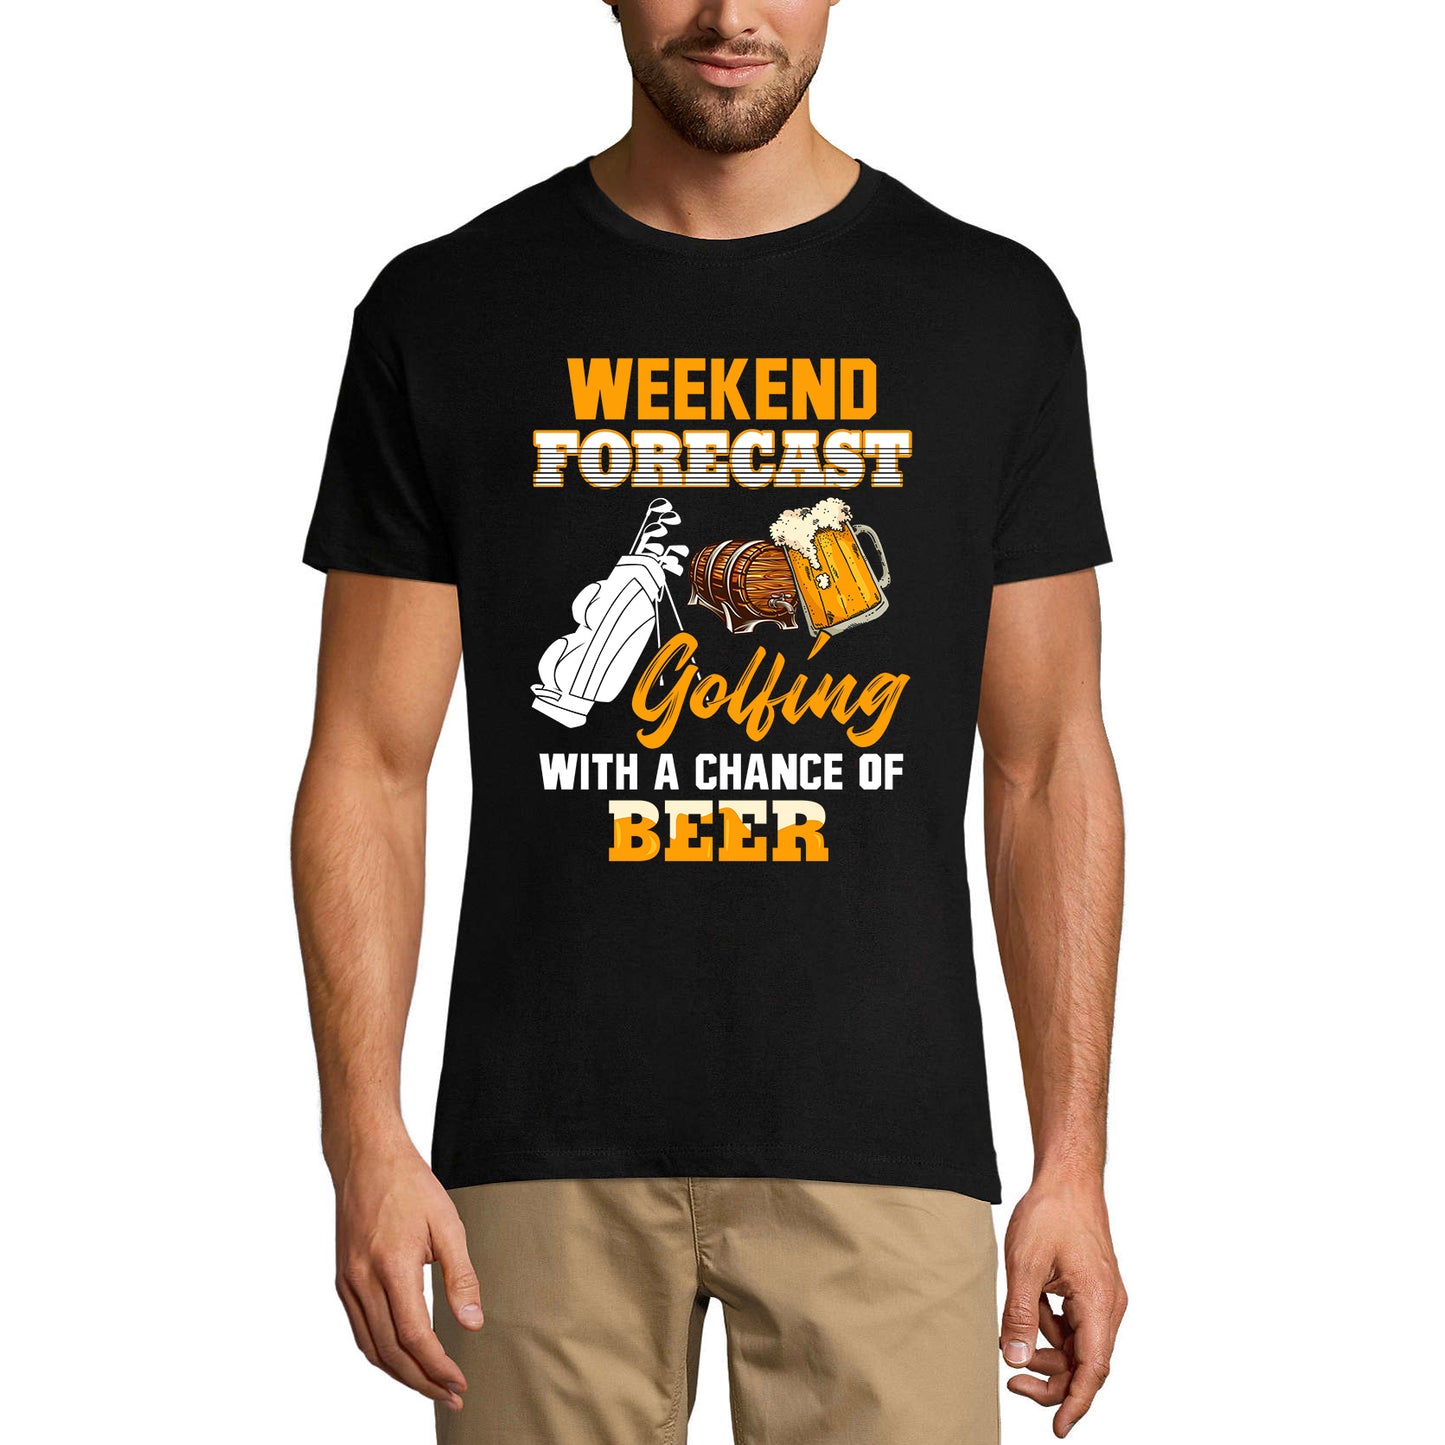 ULTRABASIC Men's T-Shirt Weekend Forecast Golfing With a Chance of Beer - Drinking Lover Tee Shirt